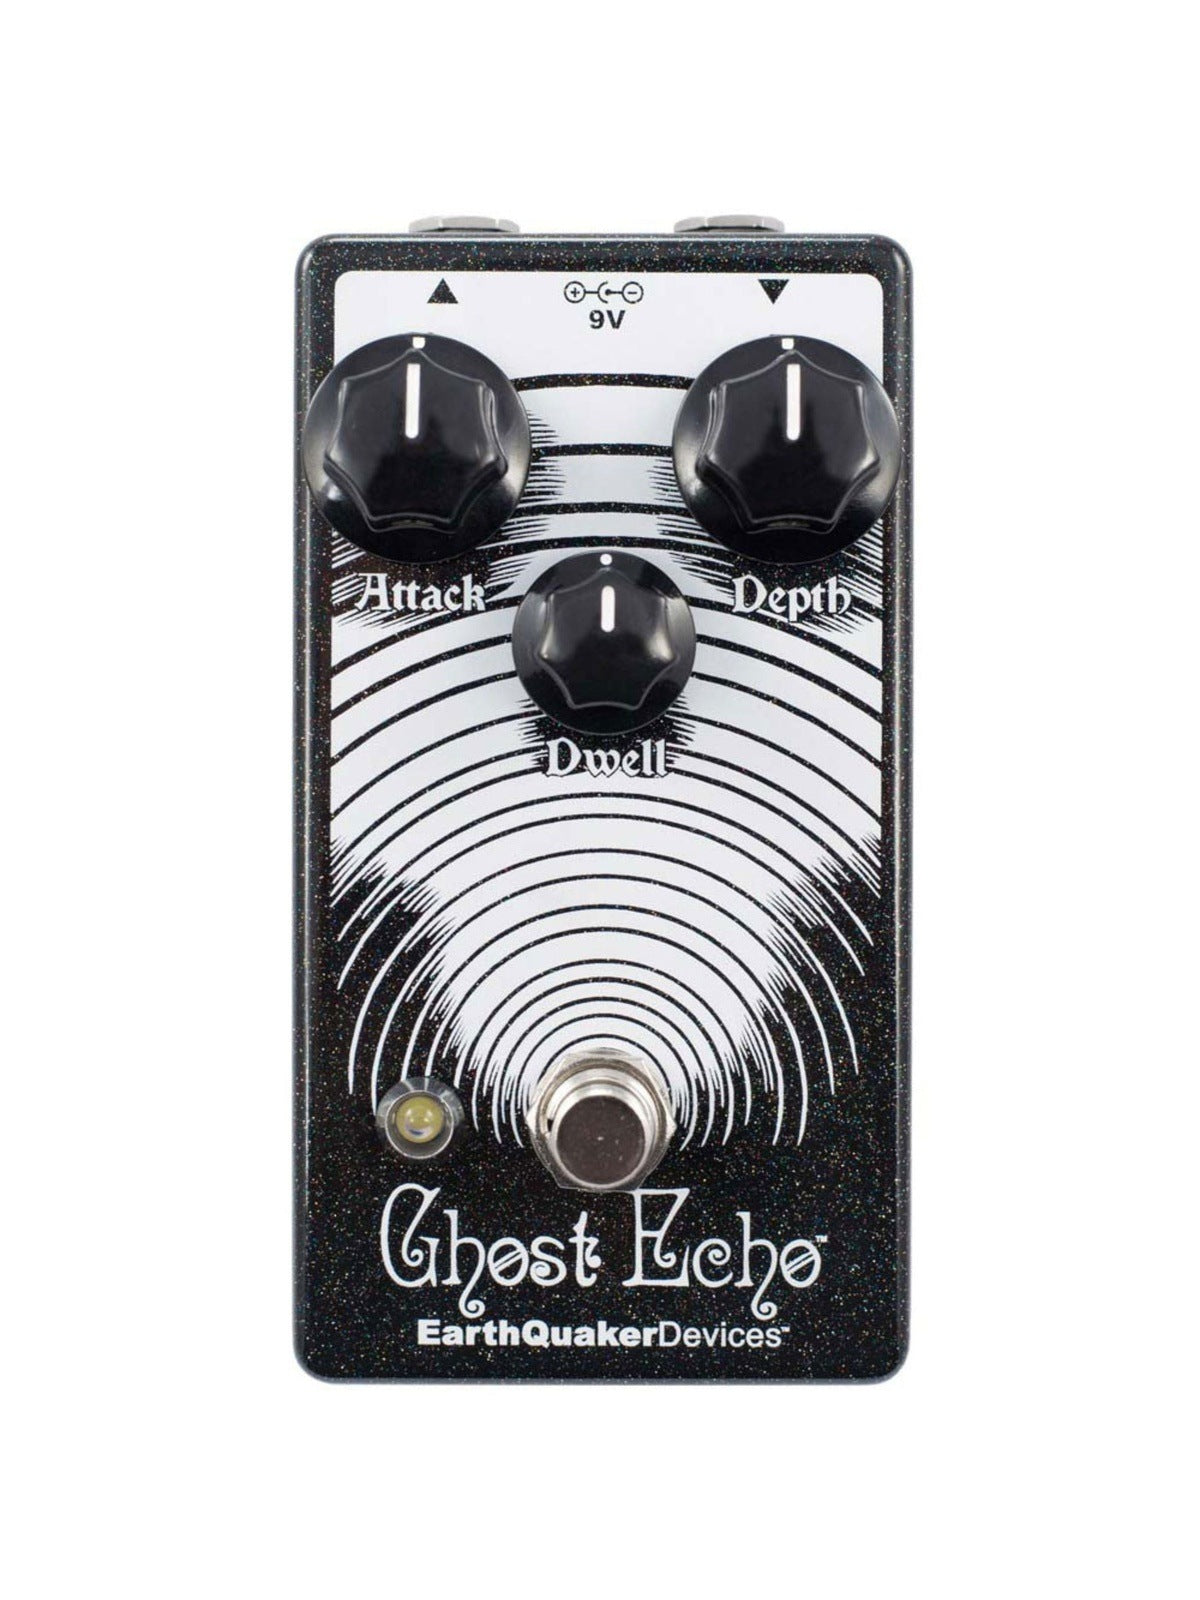 EarthQuaker Devices Ghost Echo Main Vintage Voiced Reverb Pedal